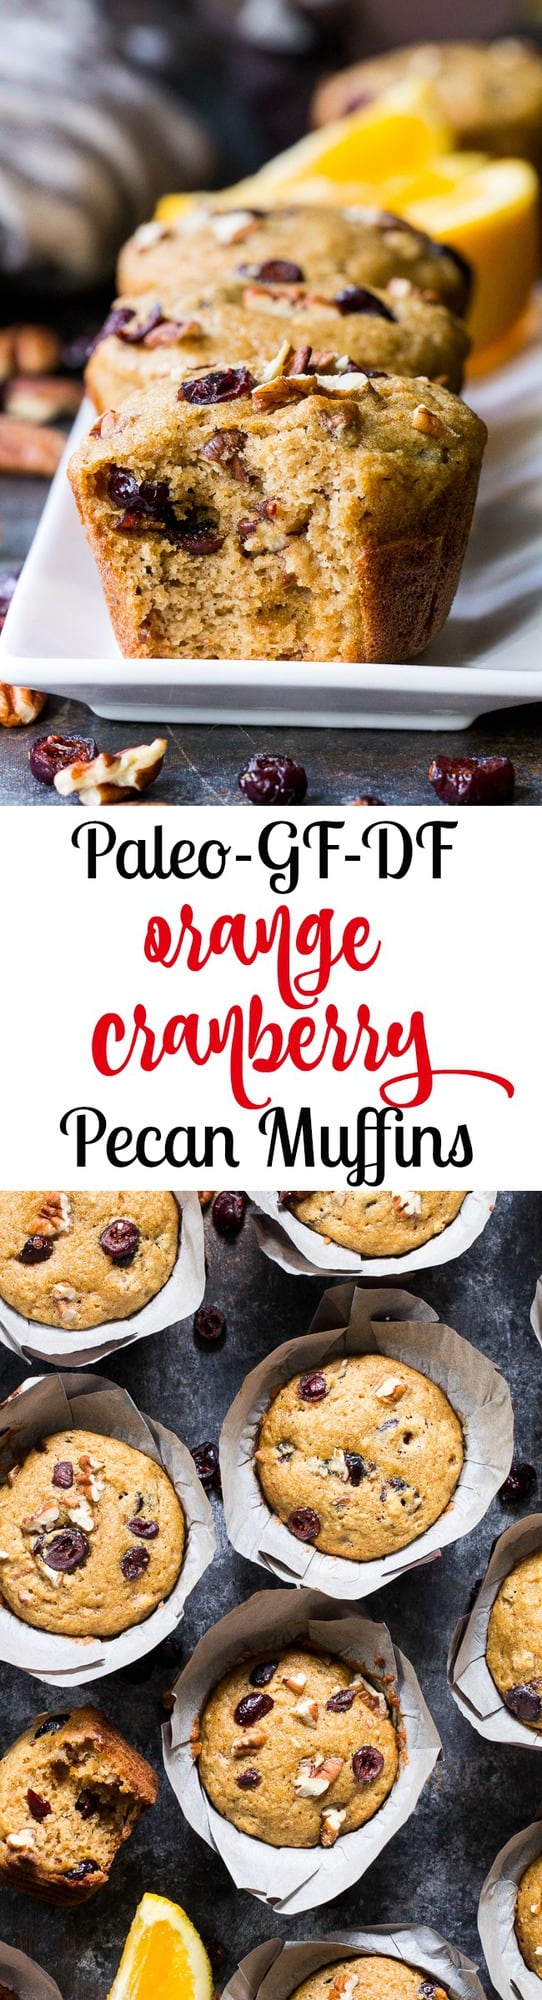 These soft, moist, and flavorful paleo cranberry orange muffins are studded with pecans and spiced just right! Great for the holidays or year round, these muffins are kid approved, gluten free, dairy free, and refined sugar free.